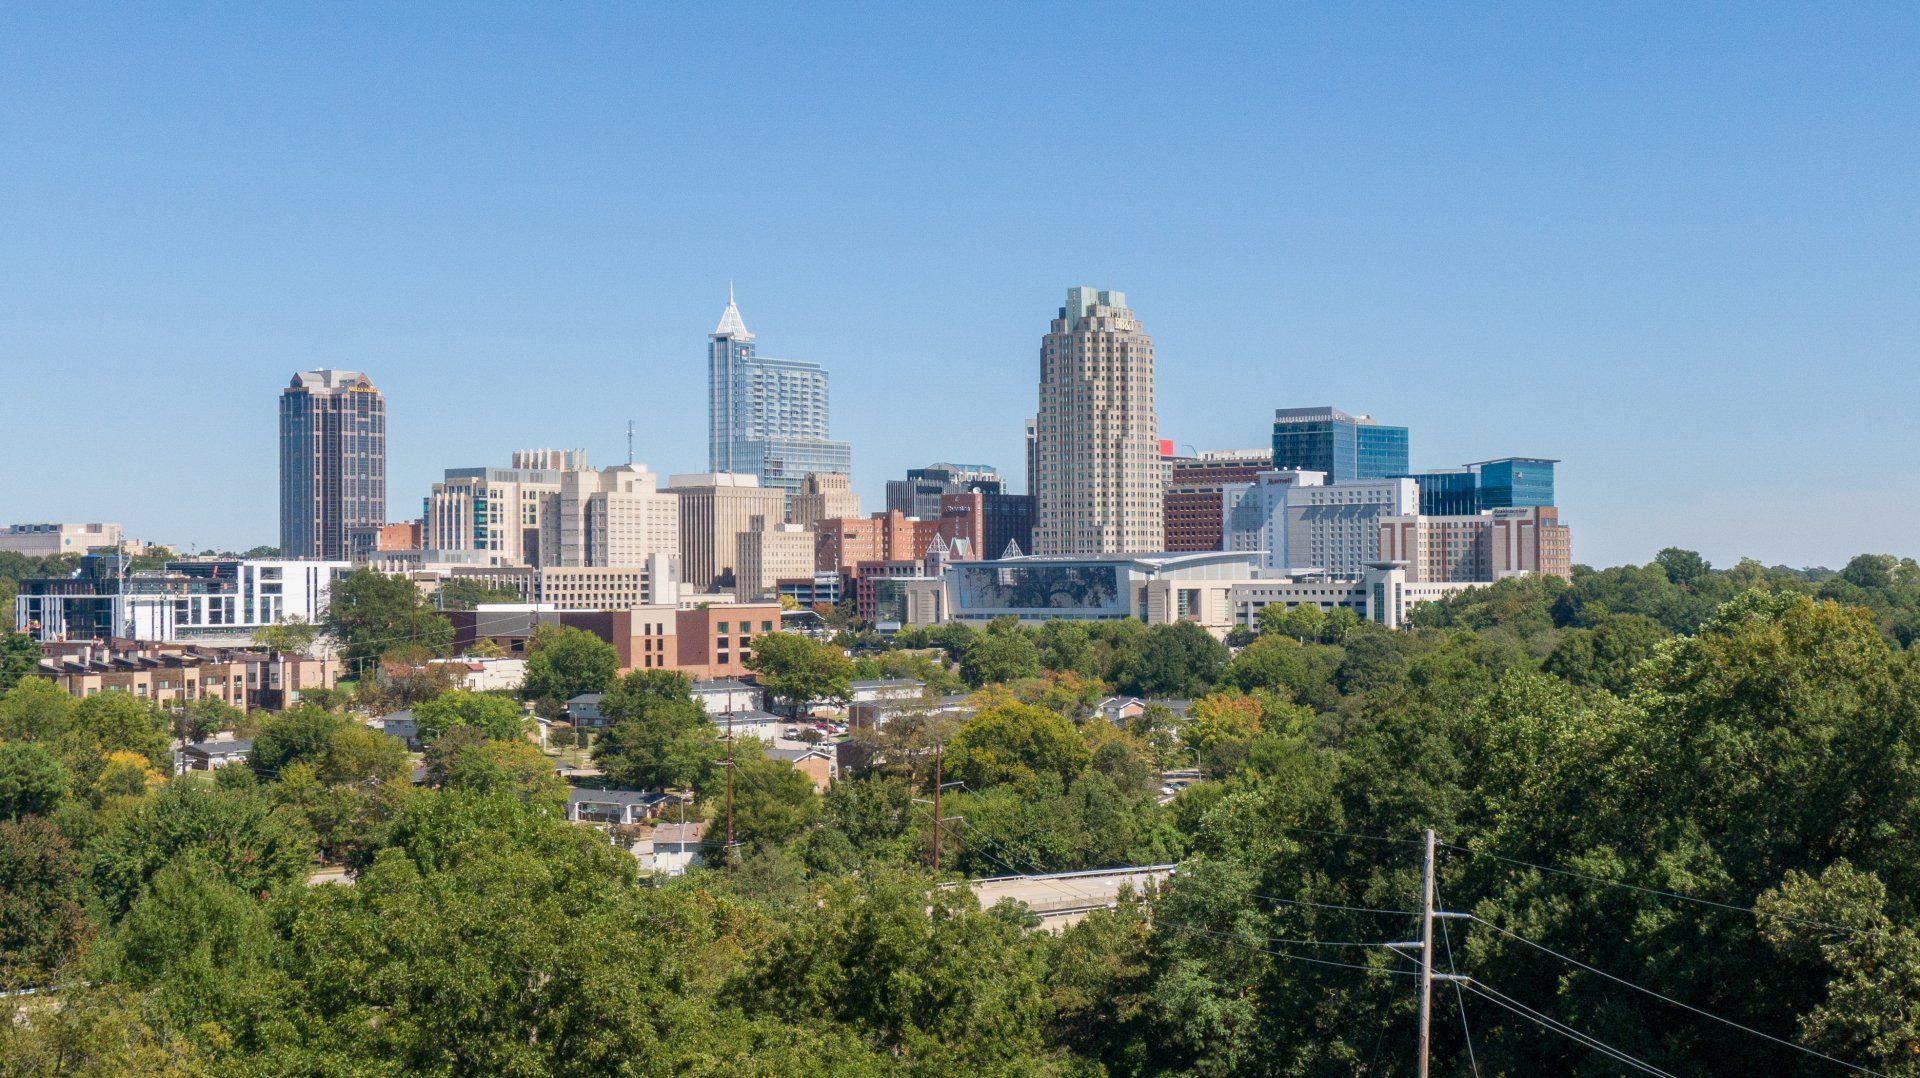 a city skyline of Raleigh, North Carolina with a few trees in the foreground